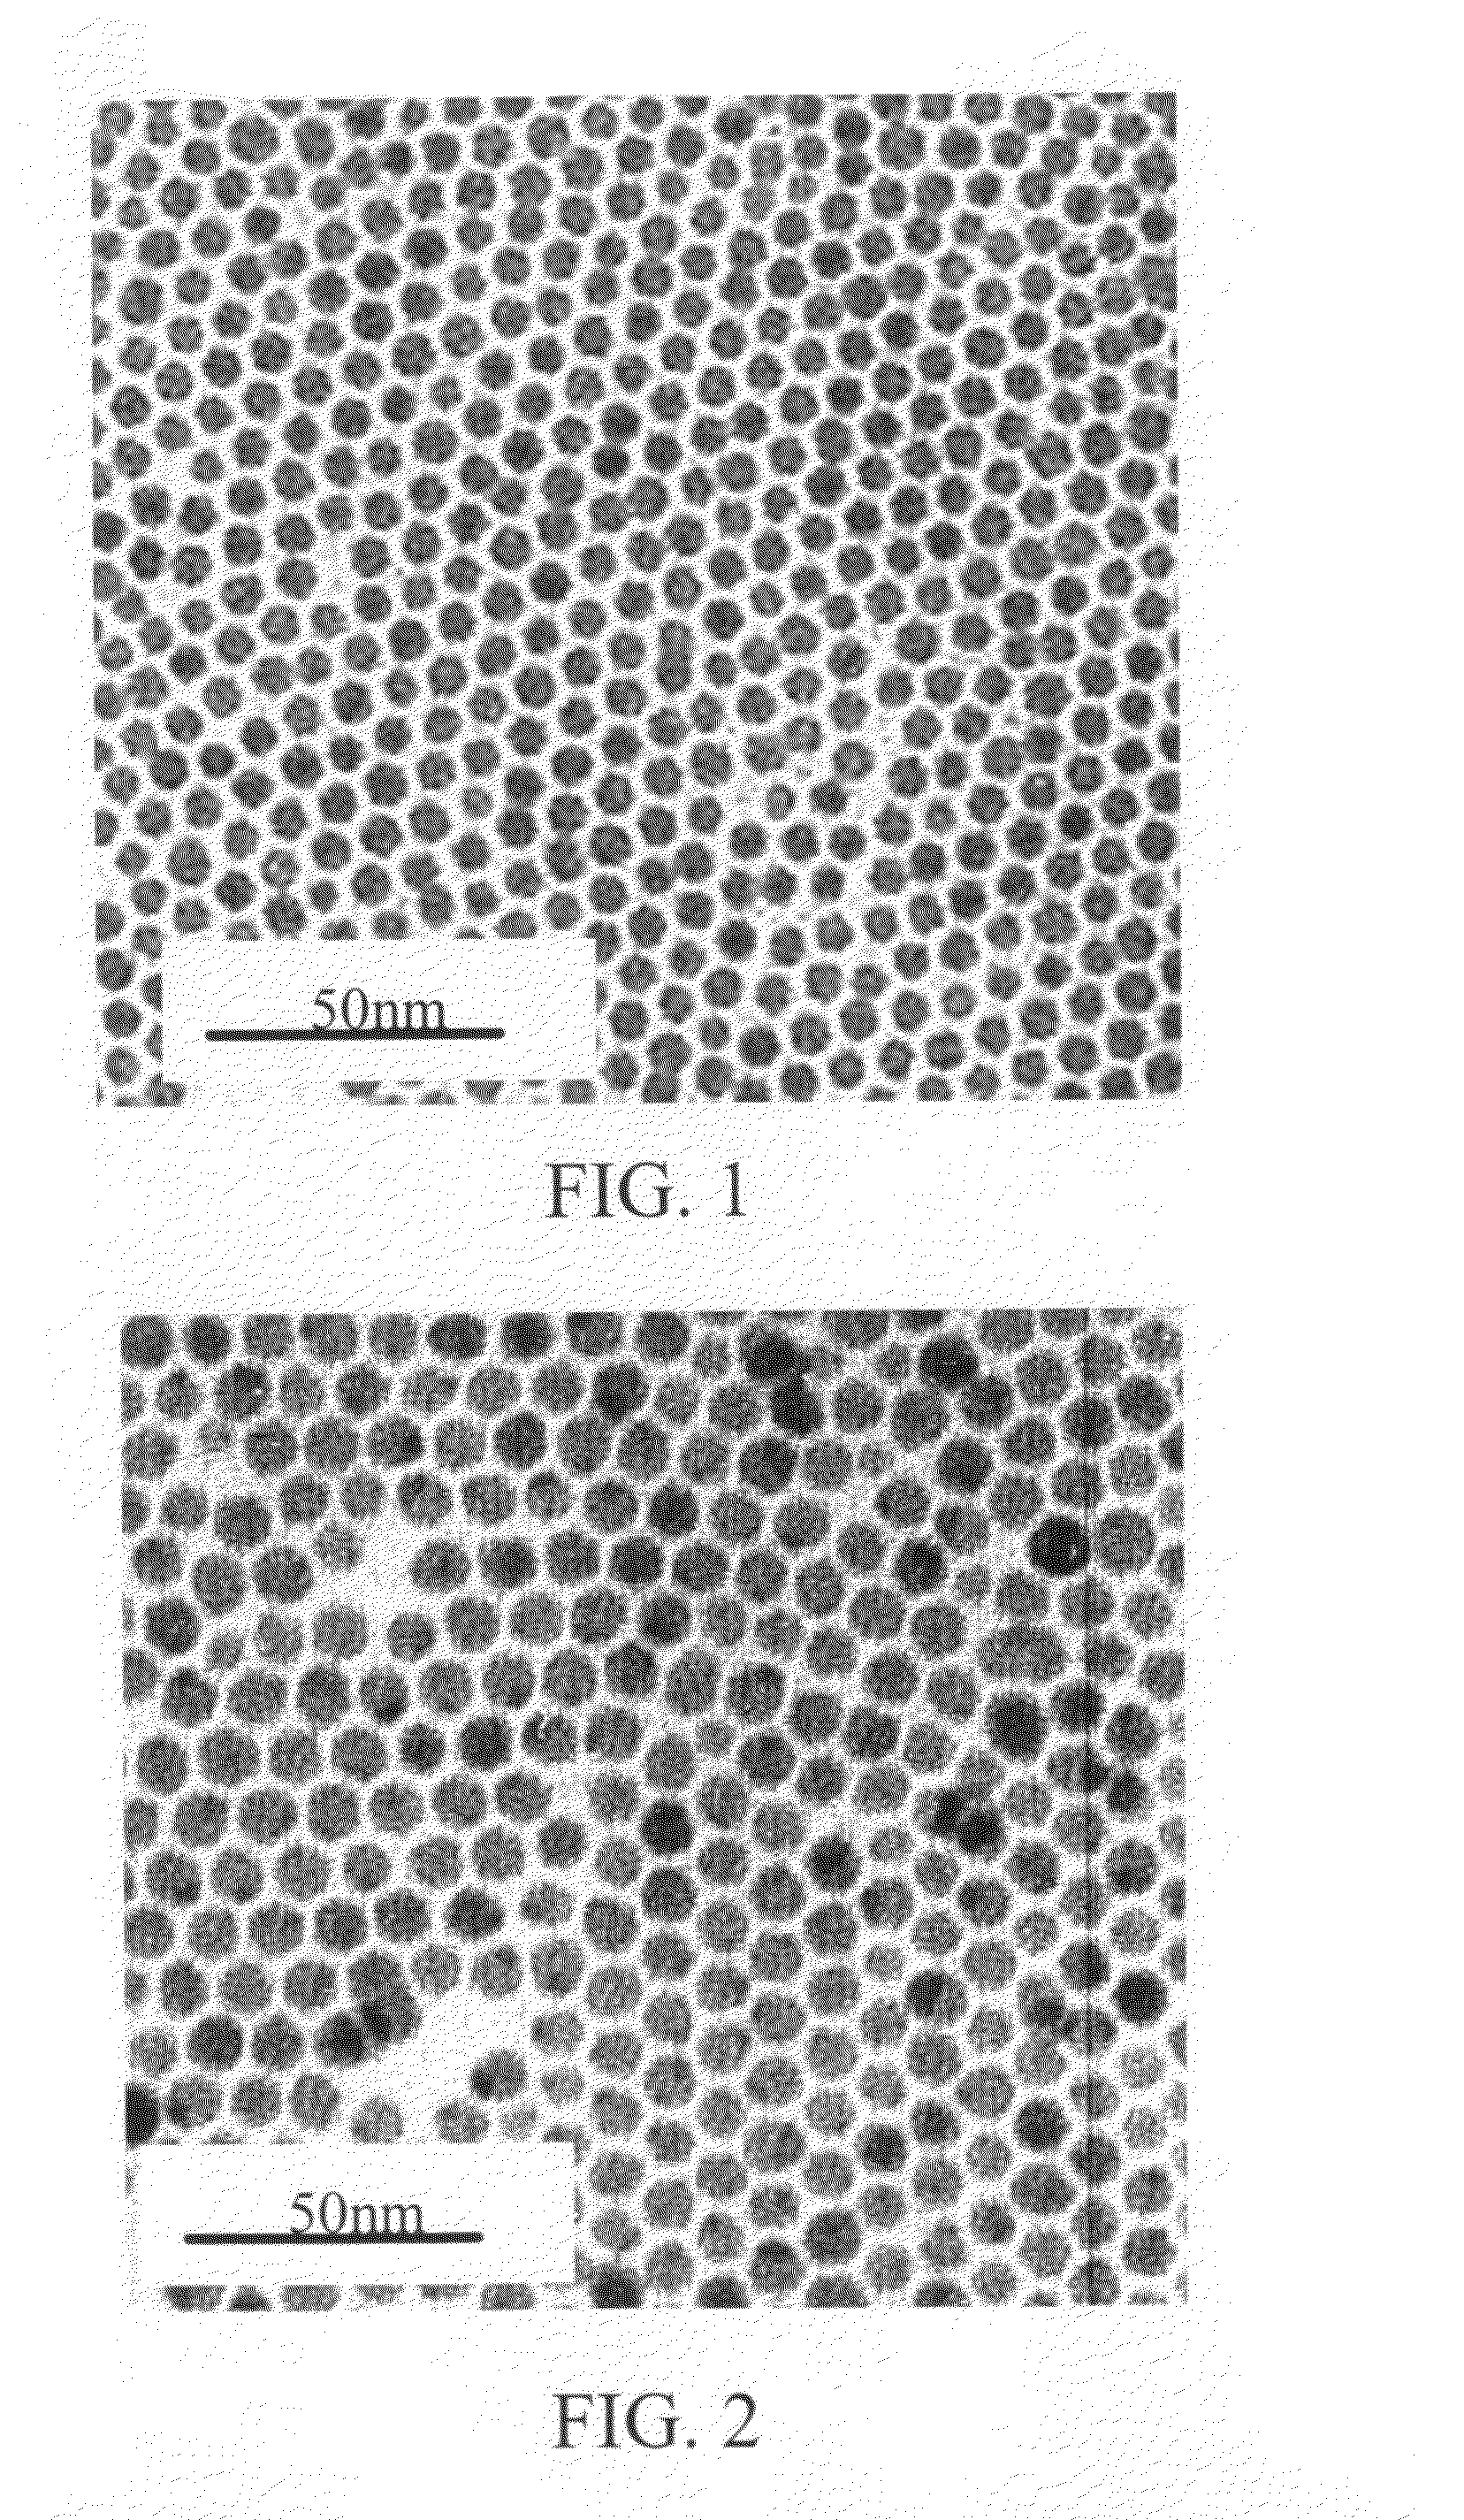 Method for making monodisperse silver and silver compound nanocrystals